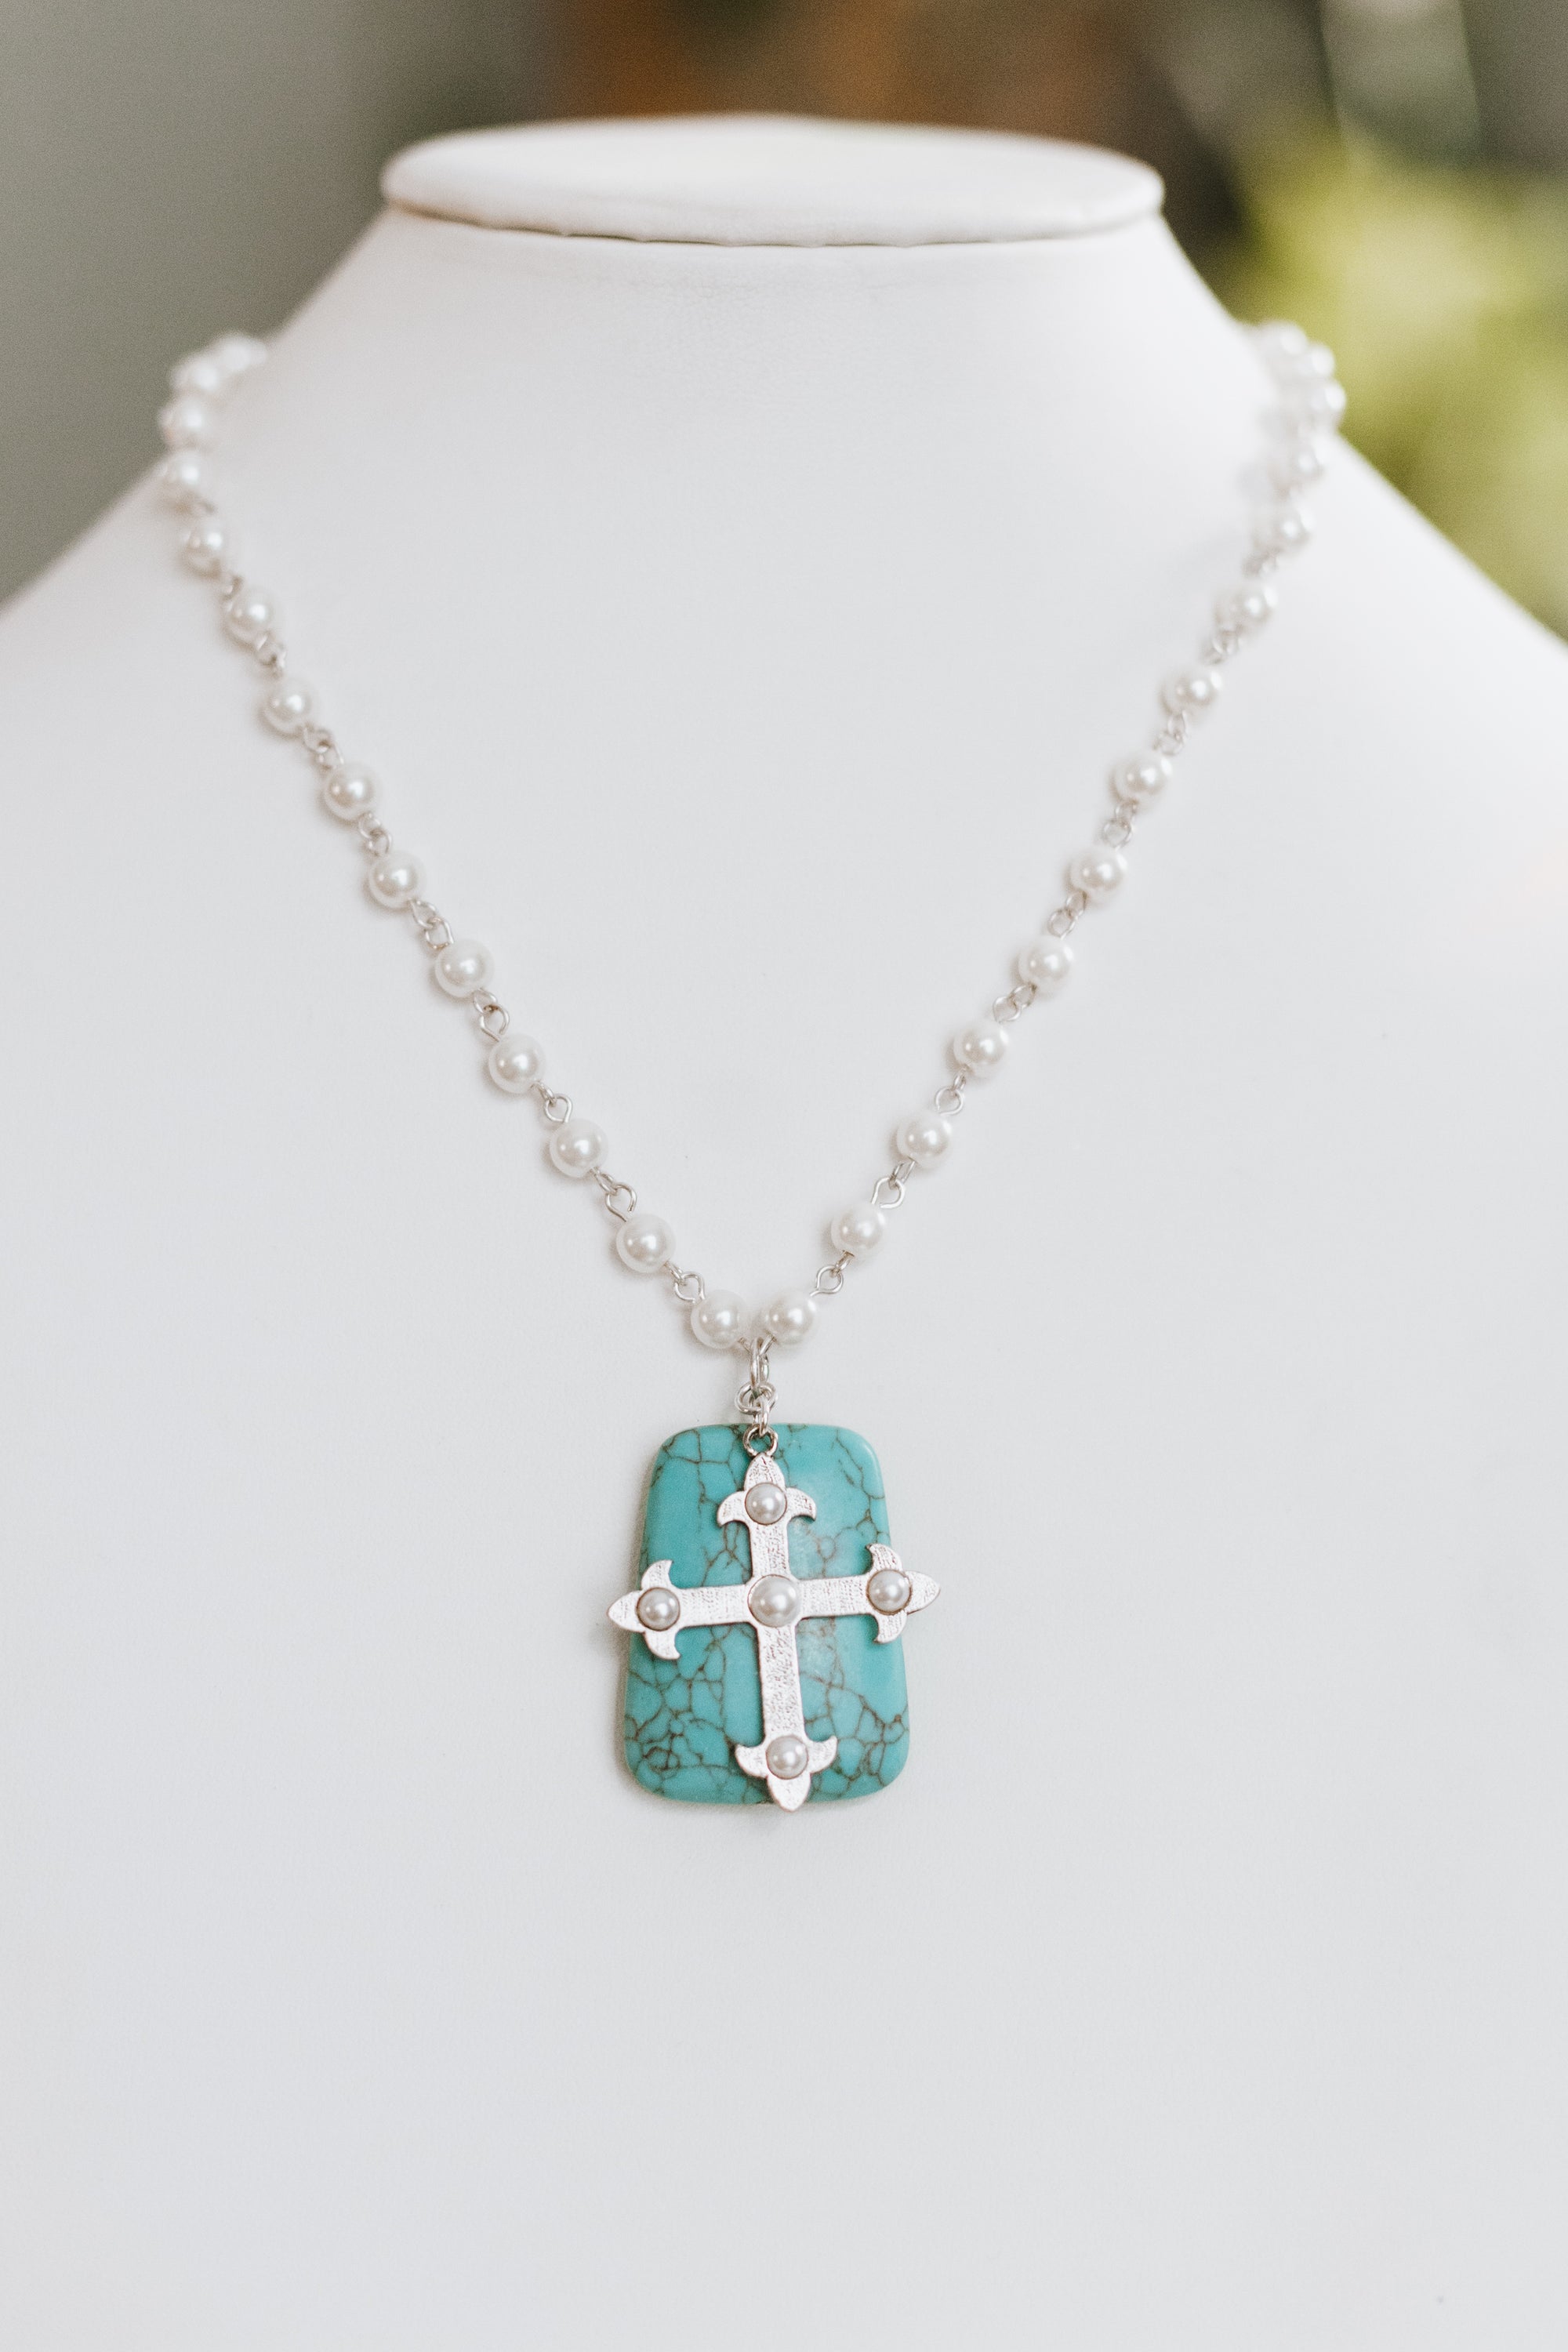 Pearl Choker with Turquoise Stone & Cross